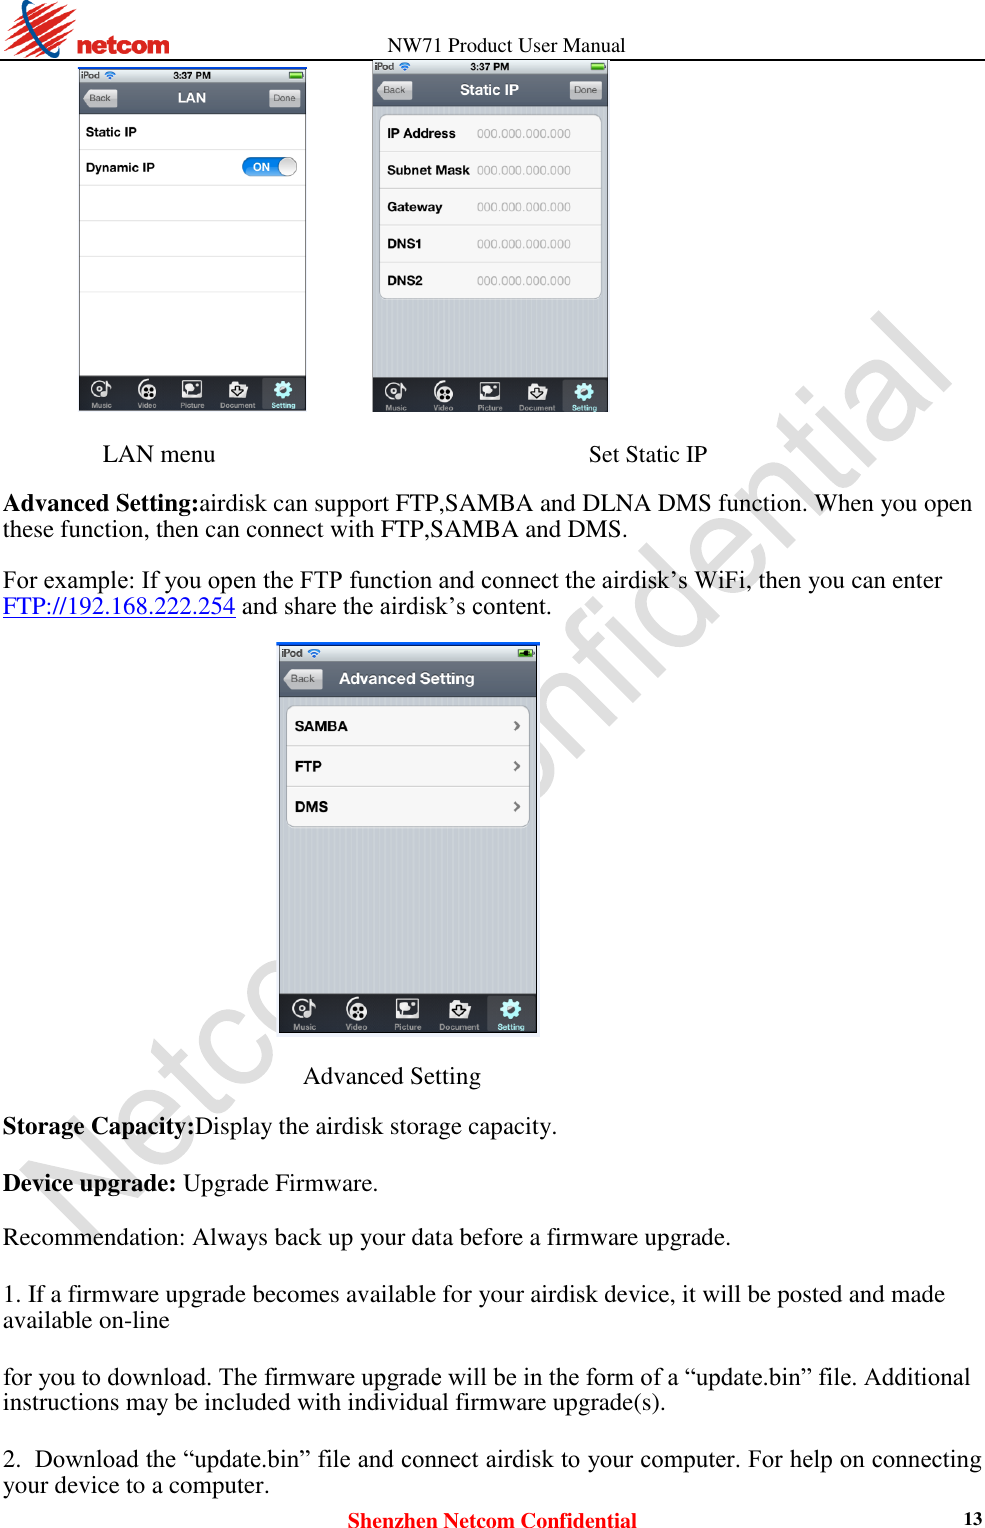                   NW71 Product User Manual Shenzhen Netcom Confidential 13          LAN menu  Set Static IP  Advanced Setting:airdisk can support FTP,SAMBA and DLNA DMS function. When you open these function, then can connect with FTP,SAMBA and DMS.  For example: If you open the FTP function and connect the airdisk’s WiFi, then you can enter   FTP://192.168.222.254 and share the airdisk’s content.    Advanced Setting  Storage Capacity:Display the airdisk storage capacity.  Device upgrade: Upgrade Firmware.  Recommendation: Always back up your data before a firmware upgrade.  1. If a firmware upgrade becomes available for your airdisk device, it will be posted and made available on-line  for you to download. The firmware upgrade will be in the form of a “update.bin” file. Additional instructions may be included with individual firmware upgrade(s).  2. Download the “update.bin” file and connect airdisk to your computer. For help on connecting your device to a computer.   